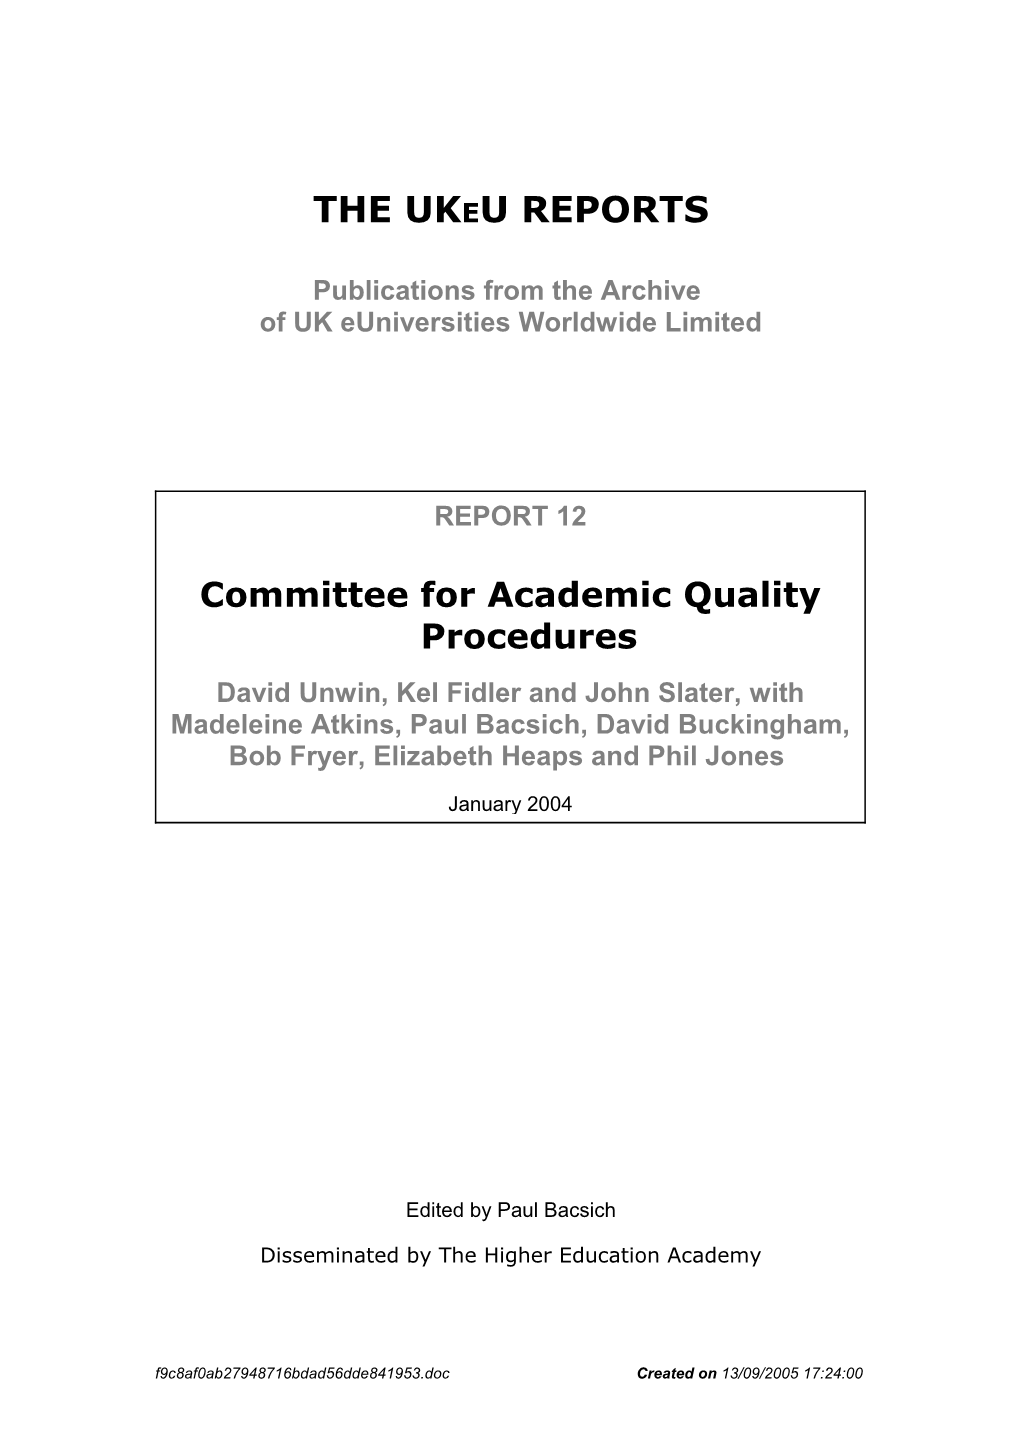 Committee for Academic Quality Procedures